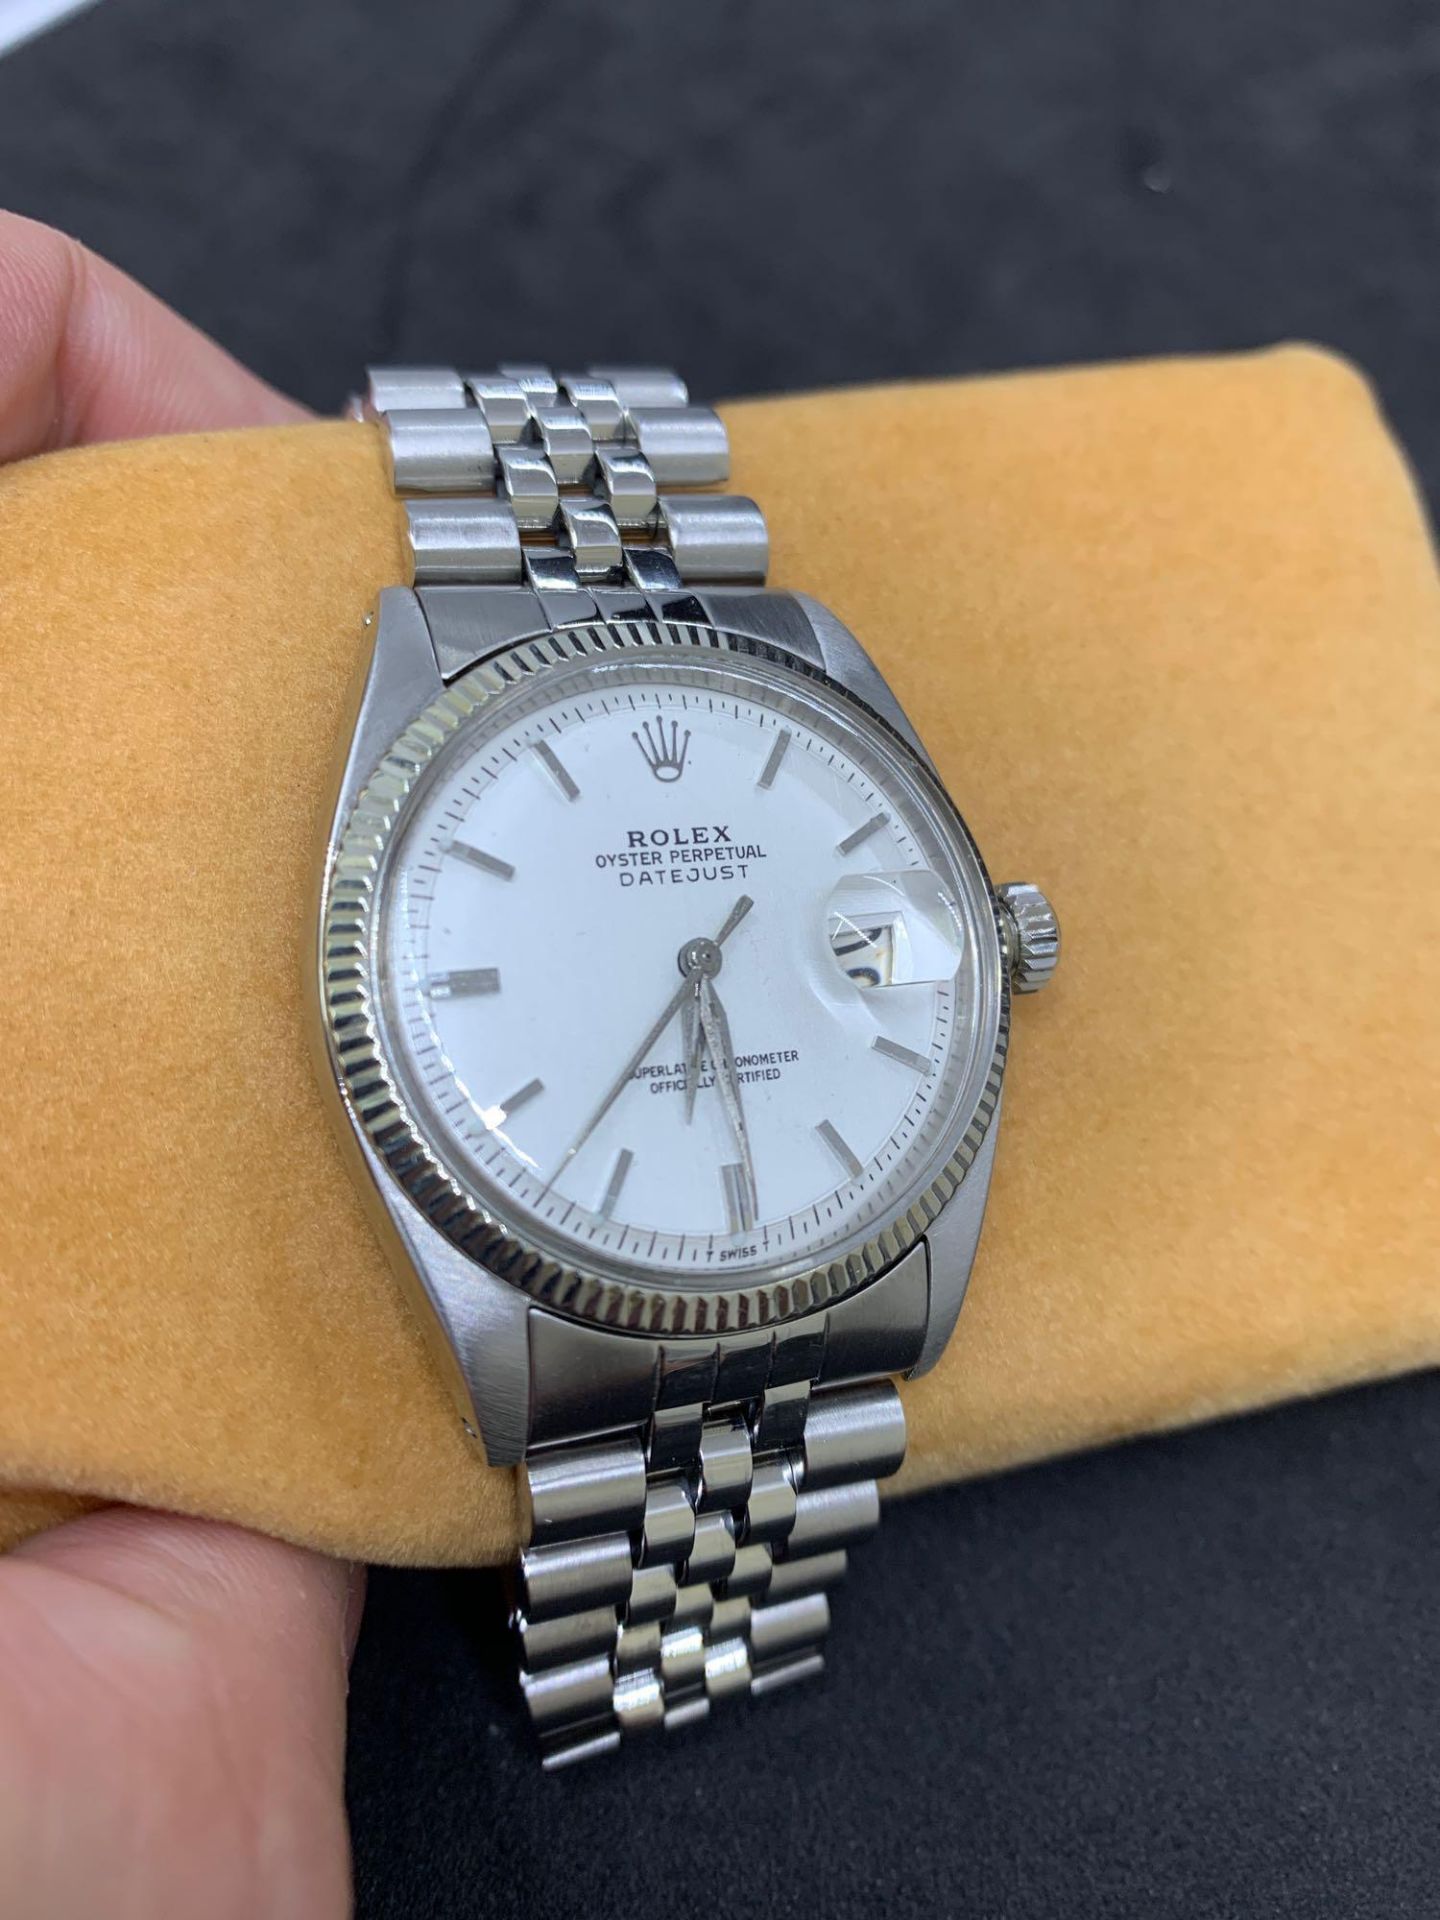 Vintage 1961 Rolex Datejust Stainless Steel & White Gold Watch Silver dial 36mm - Image 2 of 7